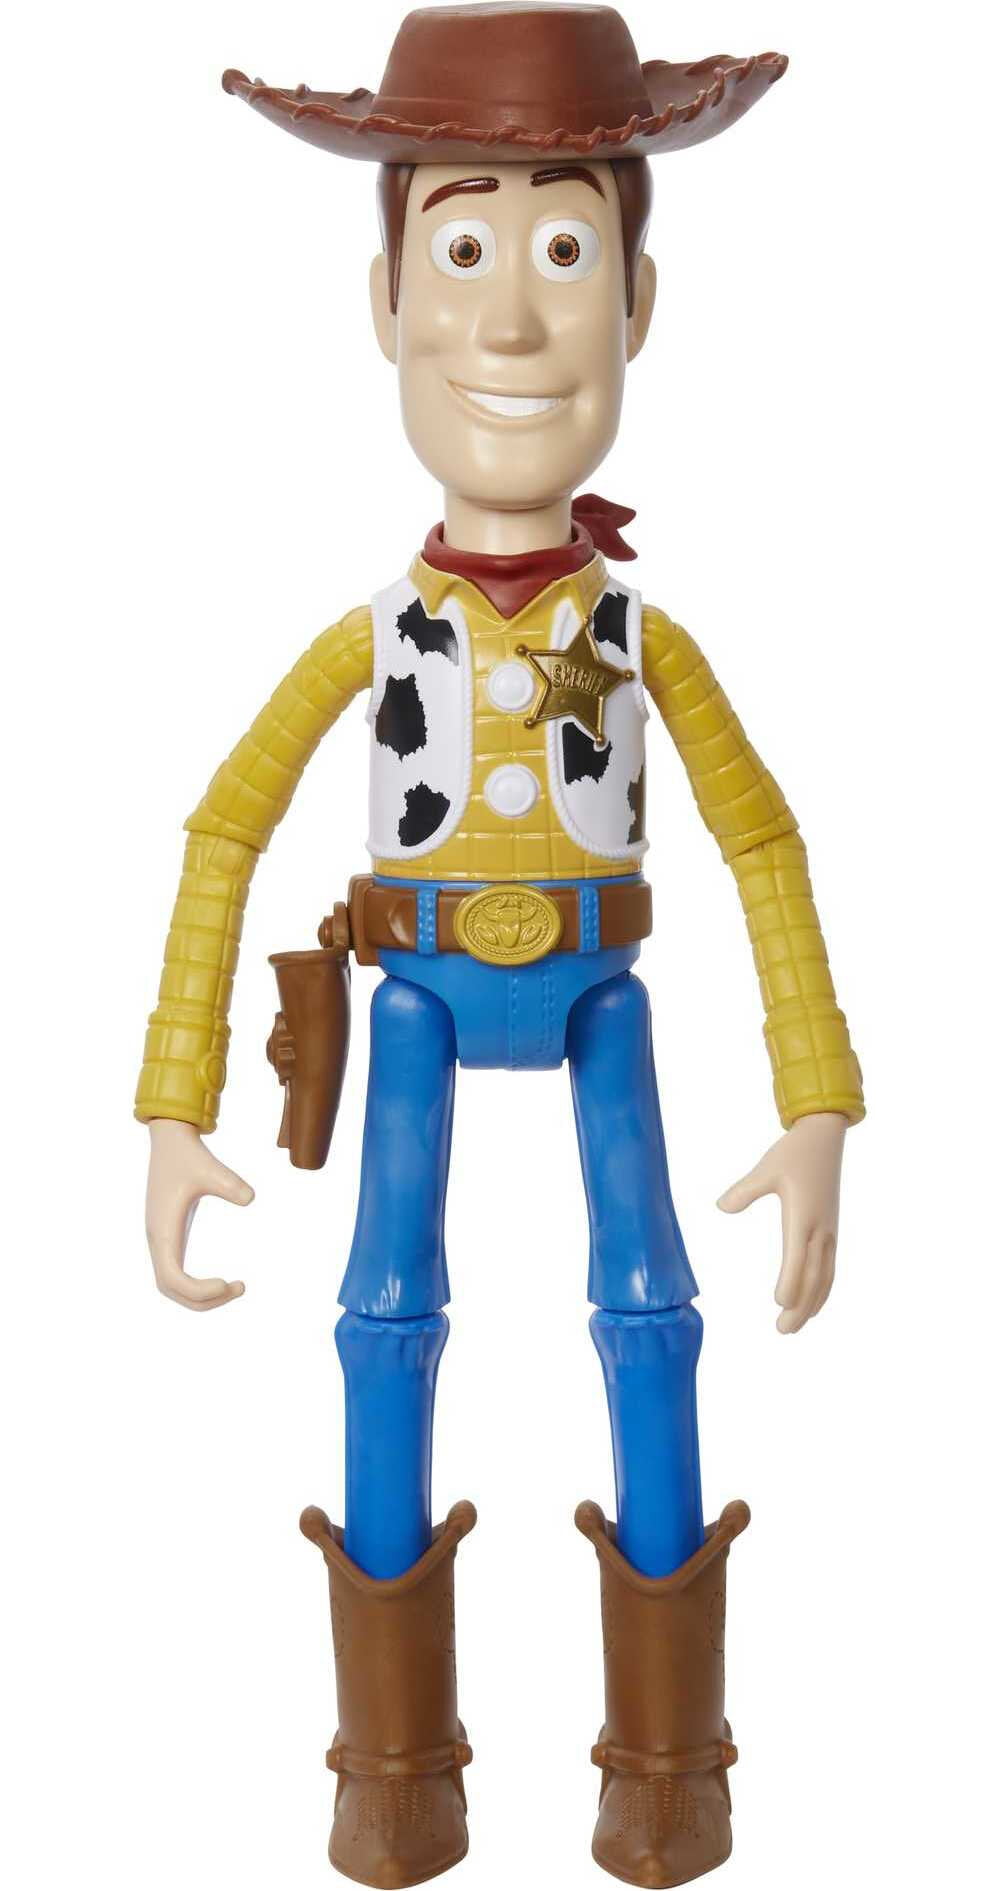 Articulated Action Figure WOODY Mattel 9 inch Disney Pixar's Toy Story 4 